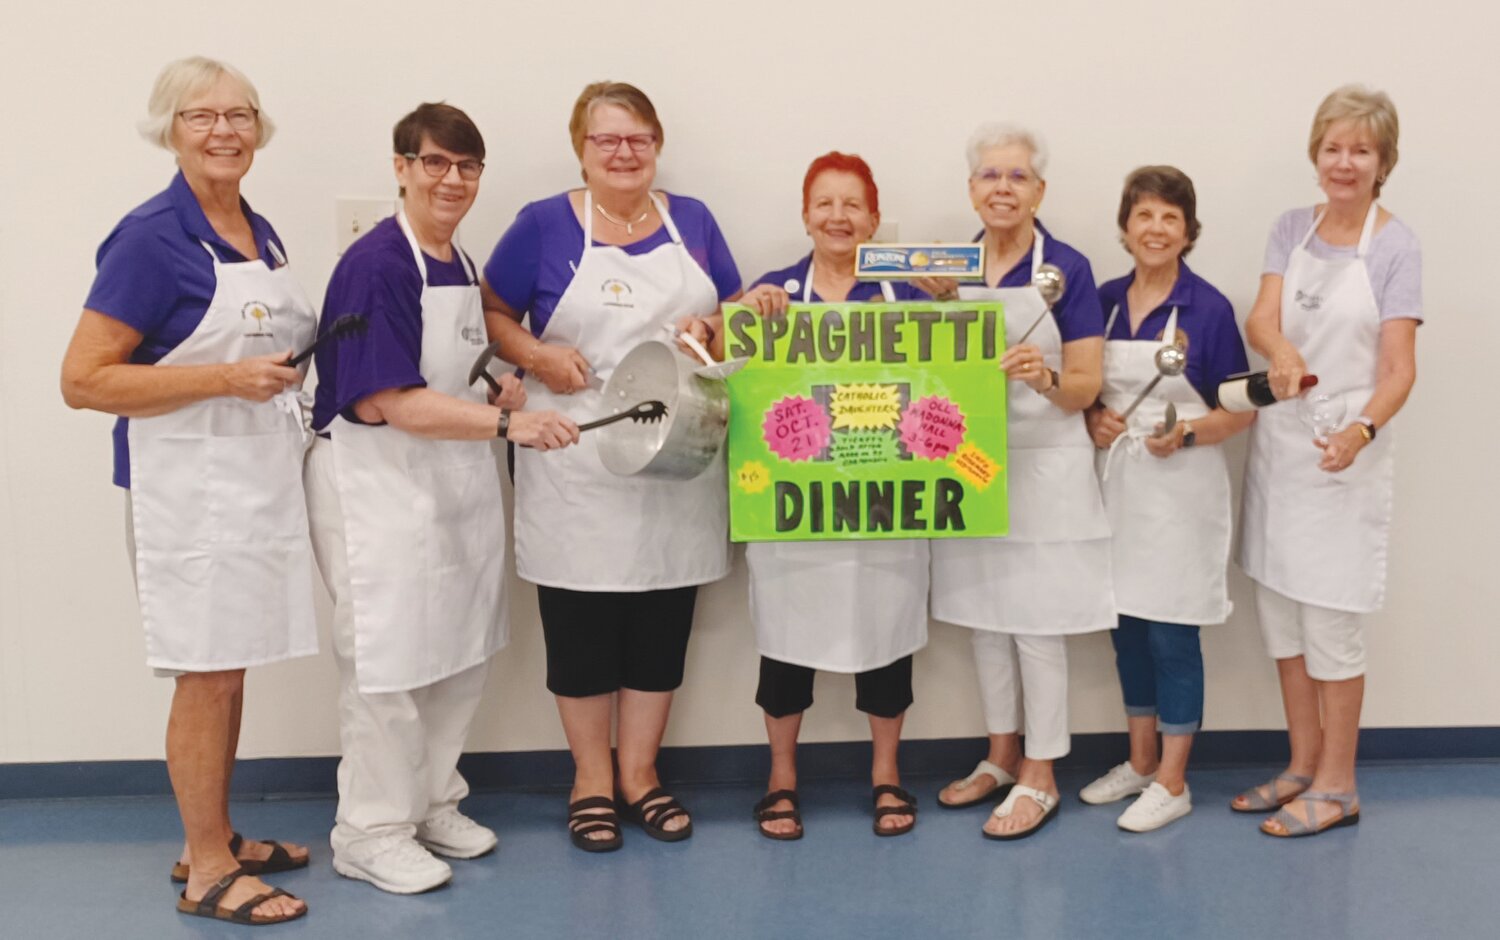 Pictured from left are Mary Beth Kunze, Servers Co-Chair, Barbara Westenberg, Tickets, Karen Czaplewski, Ticket Sales Chair, Rosemary Dougherty, General Chair, Jackie Mialki, Servers Co-Chair, Holly Zody, Chief Cook, and Colleen Fay, Salad Chair.